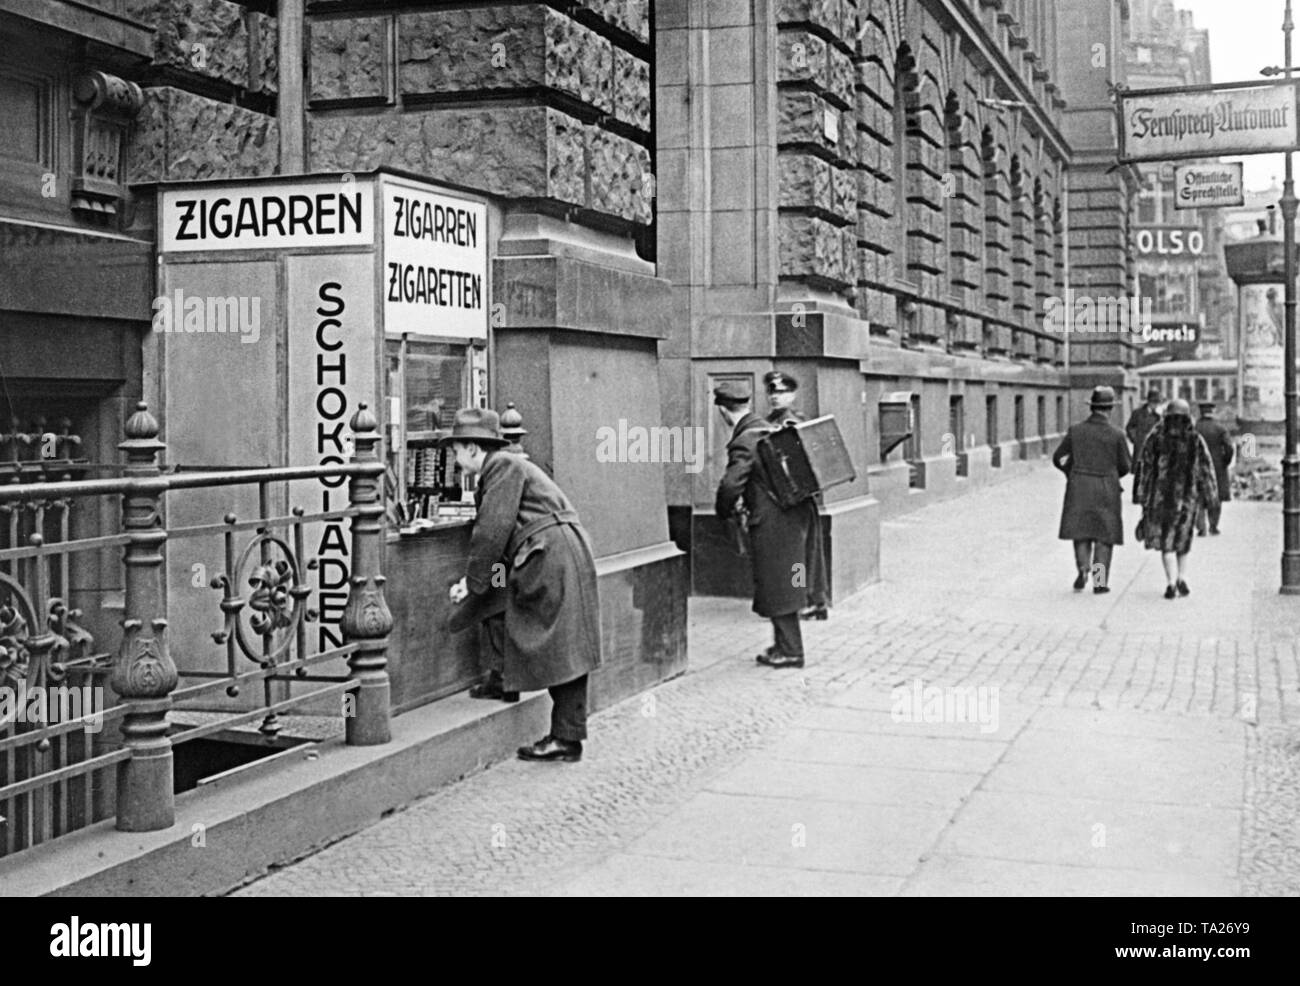 A kiosk advertises the sale of cigarettes and chocolate in the Mauerstasse in Berlin at the wall of a post office building. It is a modern stand made entirely of metal, and it is positioned so that it does not constrict the sidewalk and does not obstruct pedestrian traffic. Stock Photo